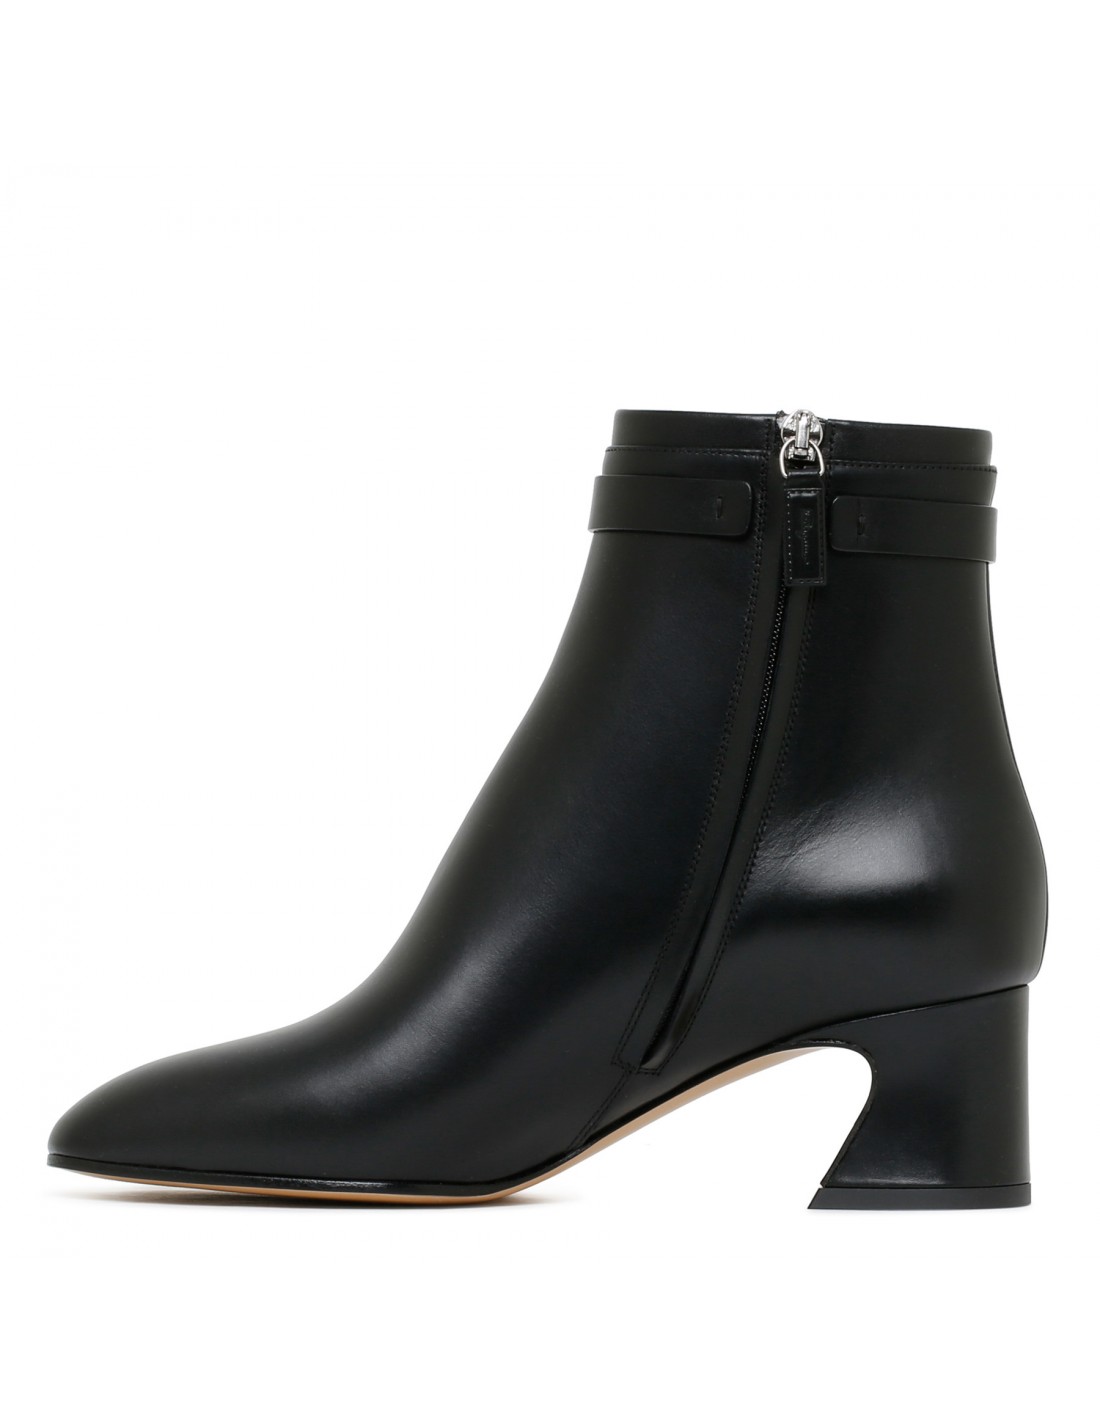 Vara chain black ankle boots